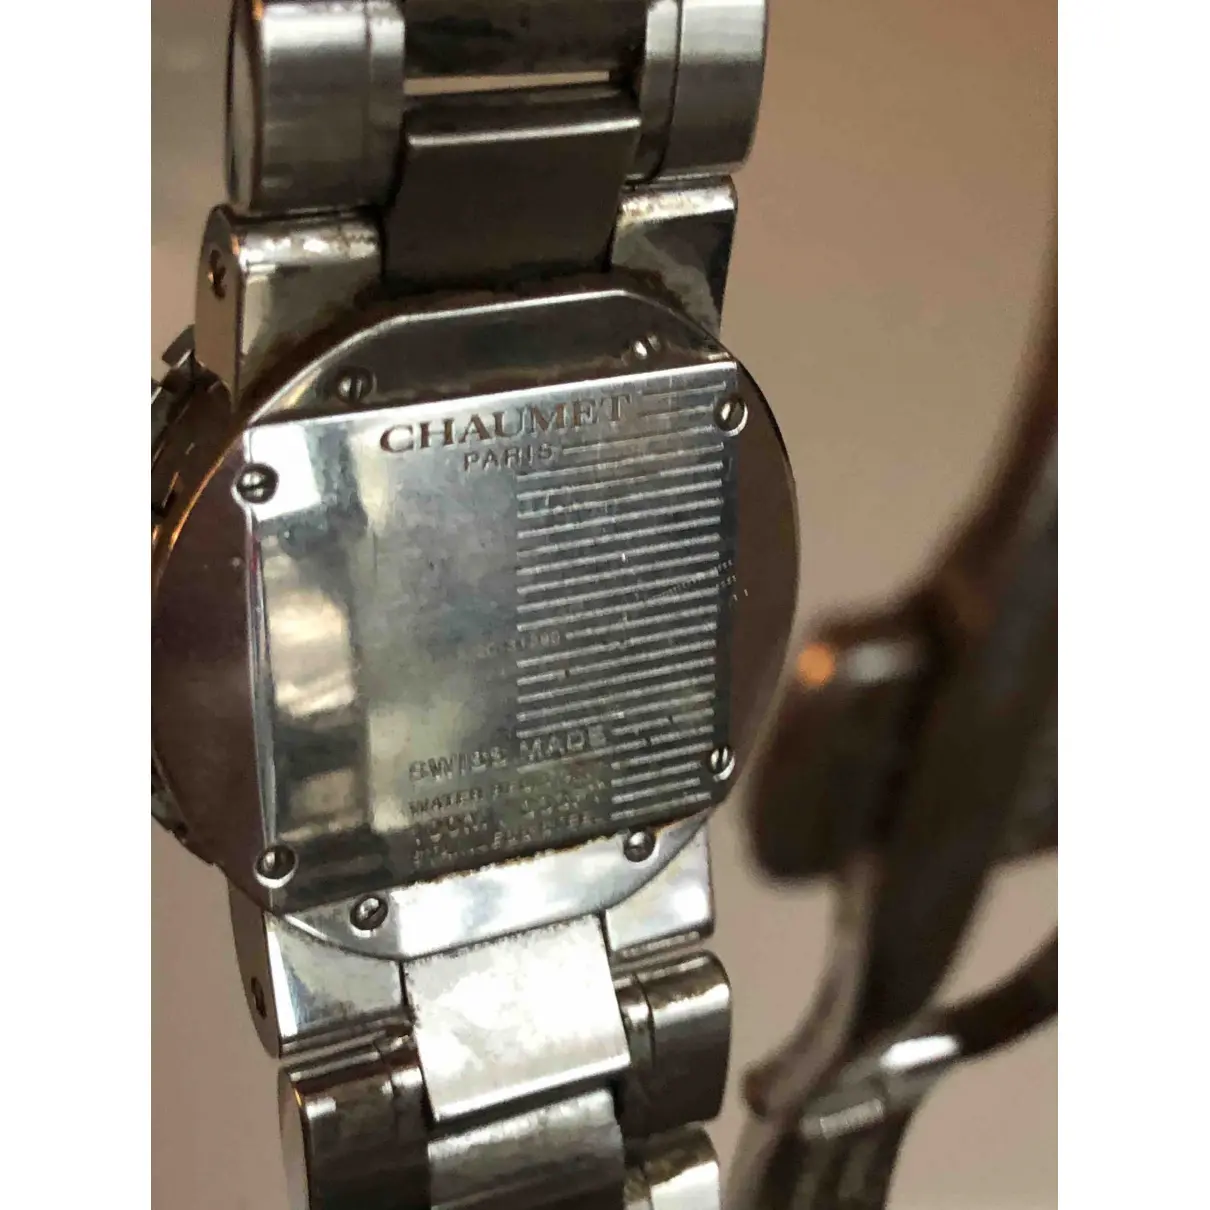 Buy Chaumet Class One watch online